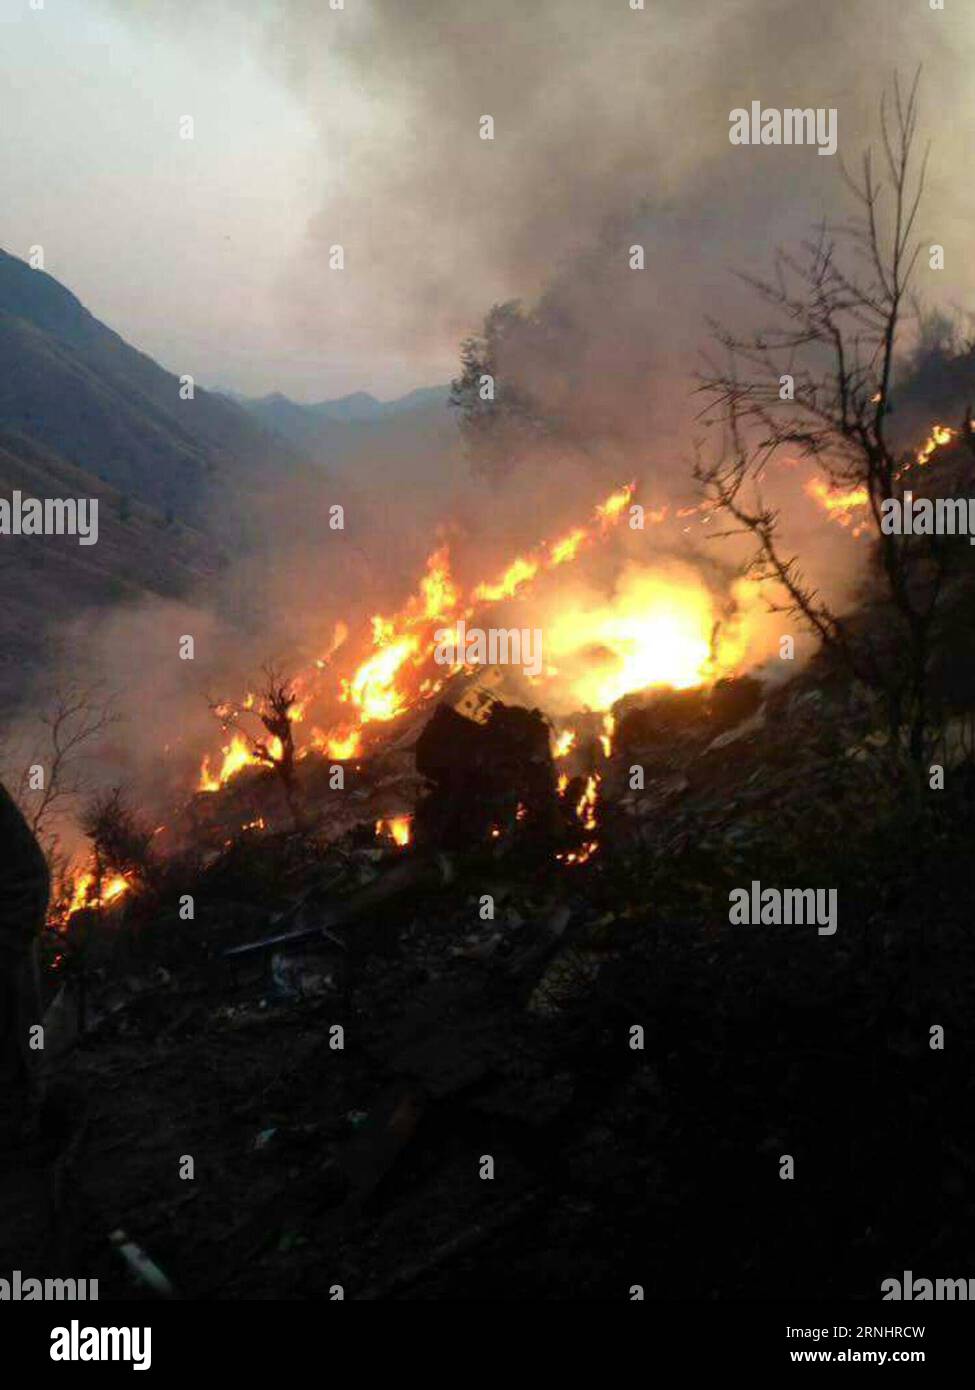 Bilder des Tages Pakistanisches Passagierflugzeug abgestürzt (161207) -- HAVELIAN (PAKISTAN), Dec. 7, 2016 -- Photo taken on Dec. 7, 2016 shows fire raging from a plane crash site in Pakistan s Havelian. Rescue work is underway after a passenger plane of Pakistan International Airlines (PIA) with 47 people on board crashed in the country s northern Havelian area on Wednesday, officials said. ) (sxk) PAKISTAN-HAVELIAN-PLANE CRASH Stringer PUBLICATIONxNOTxINxCHN   Images the Day Pakistani Passenger aircraft crashed   Pakistan DEC 7 2016 Photo Taken ON DEC 7 2016 Shows Fire Raging from a Plane Cr Stock Photo